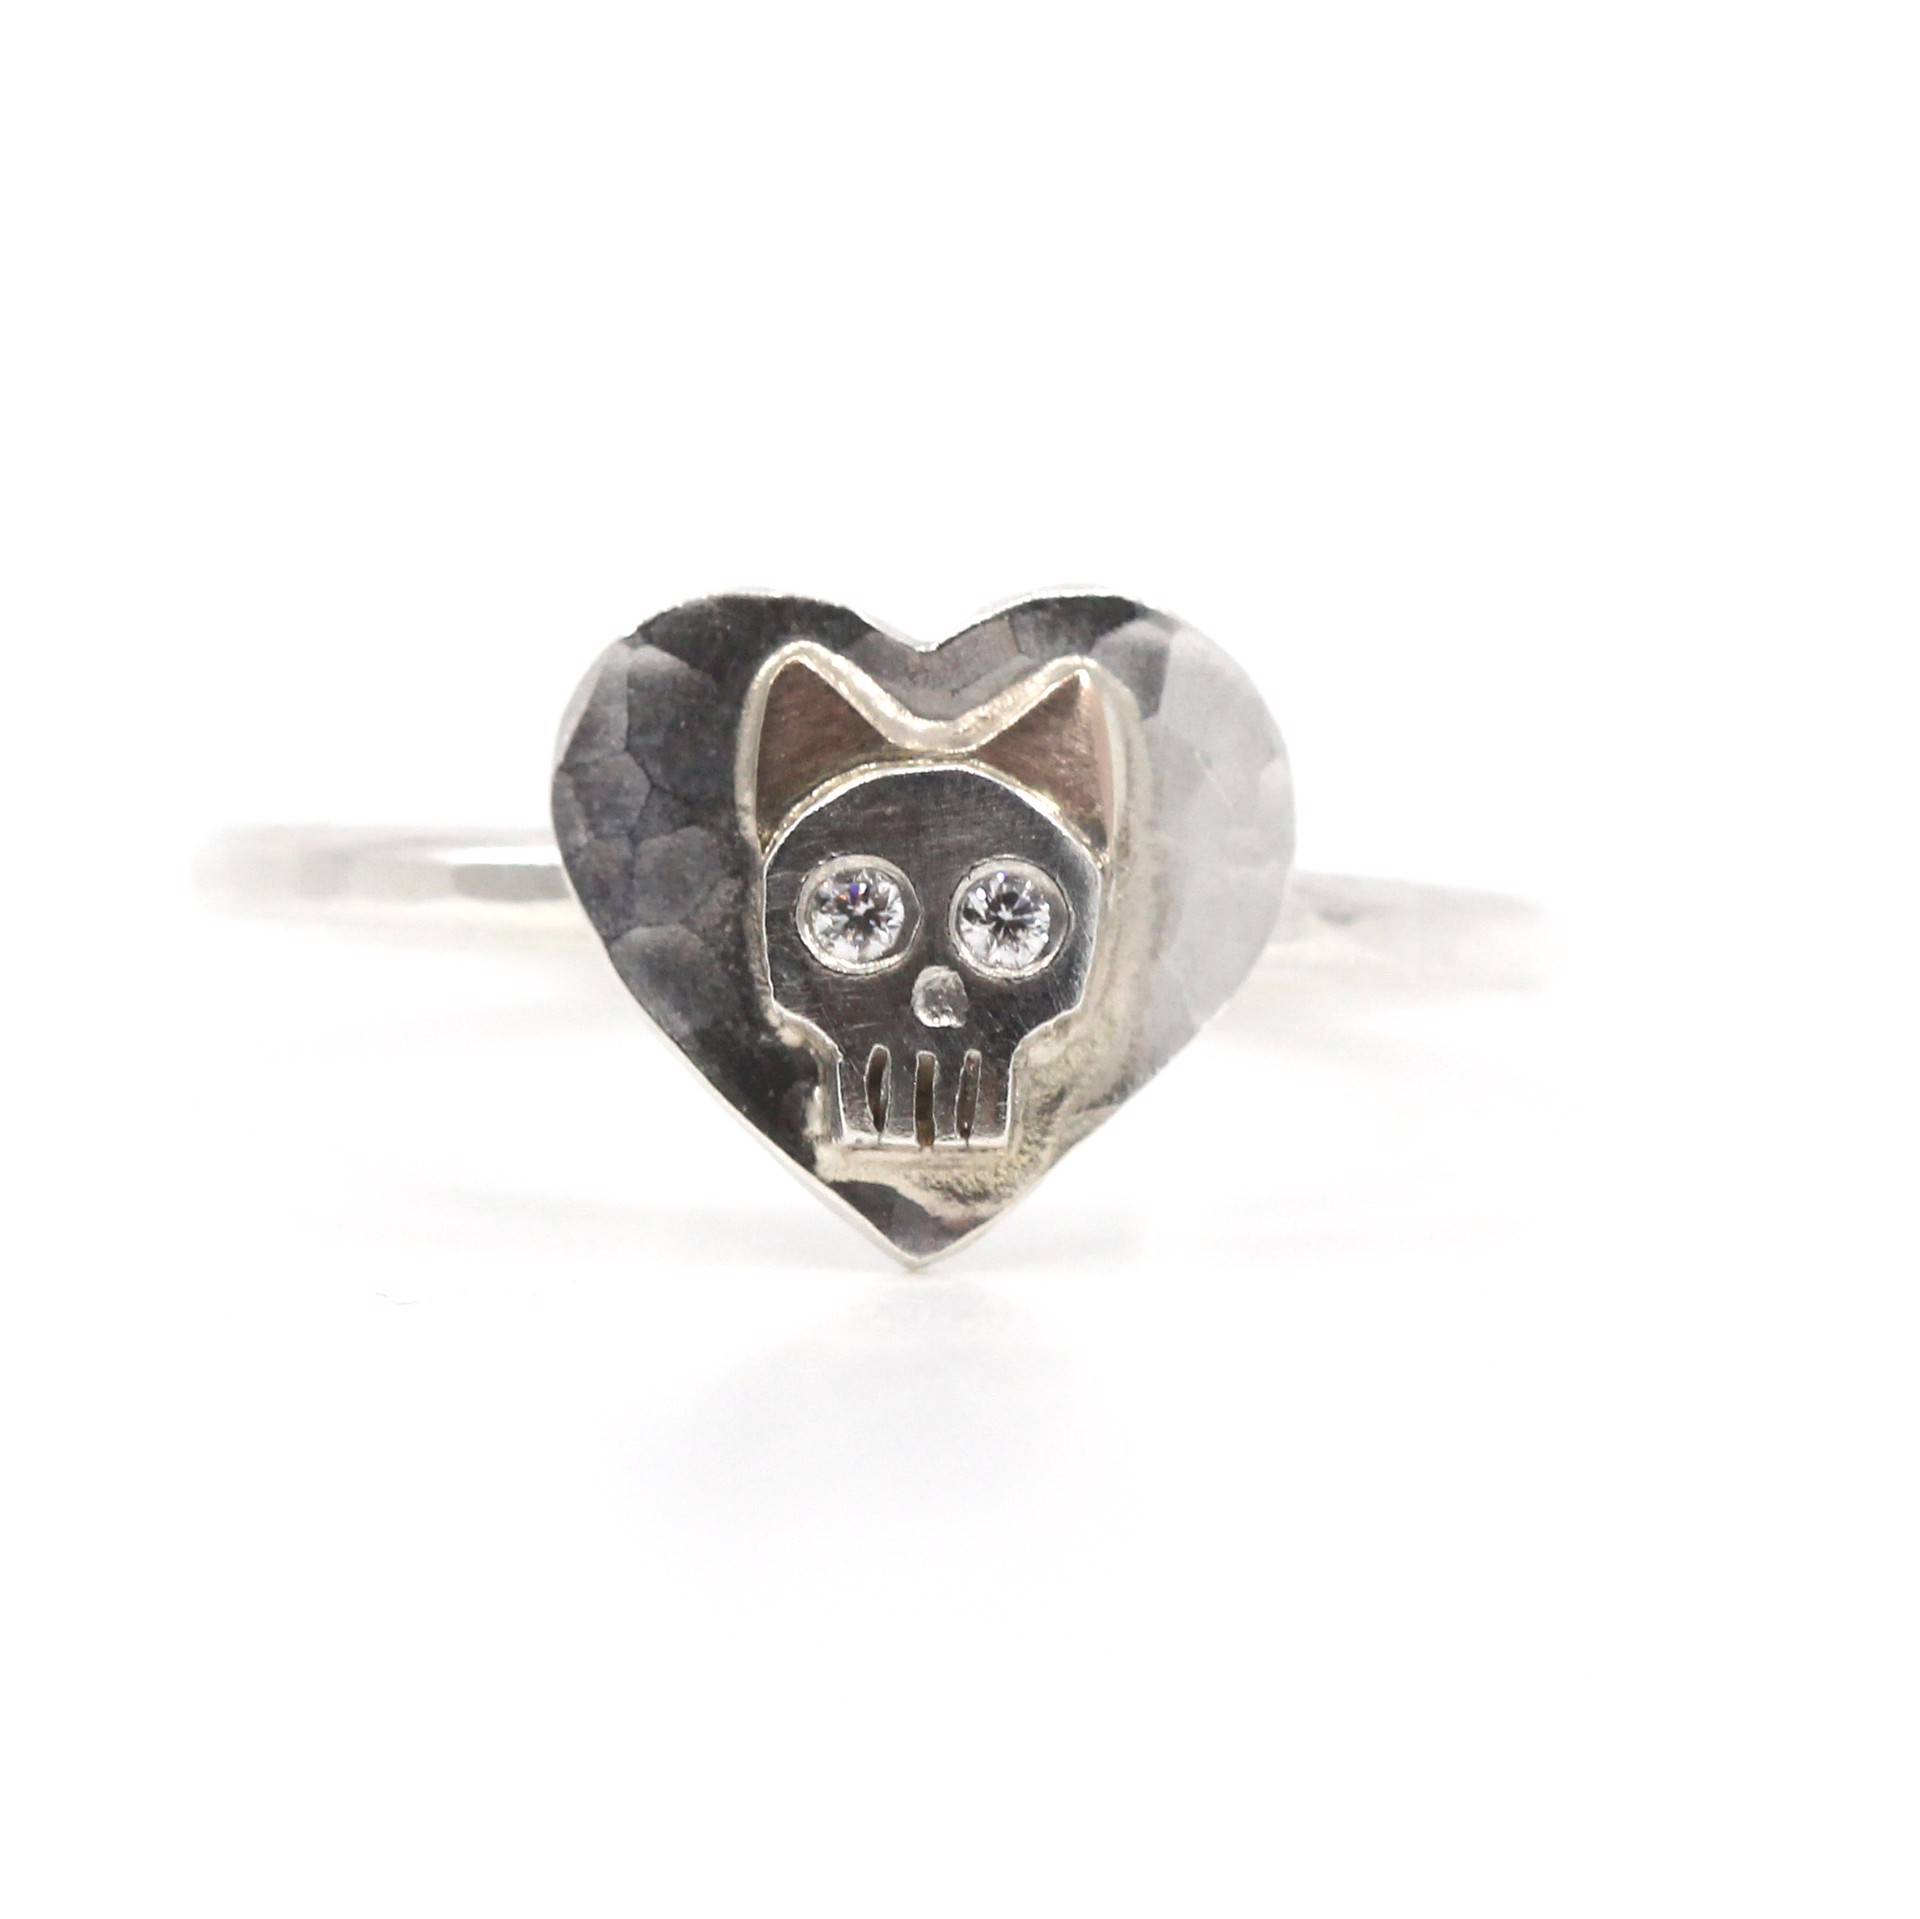 Kitty Heart Ring (Size 6) by Susan Elnora